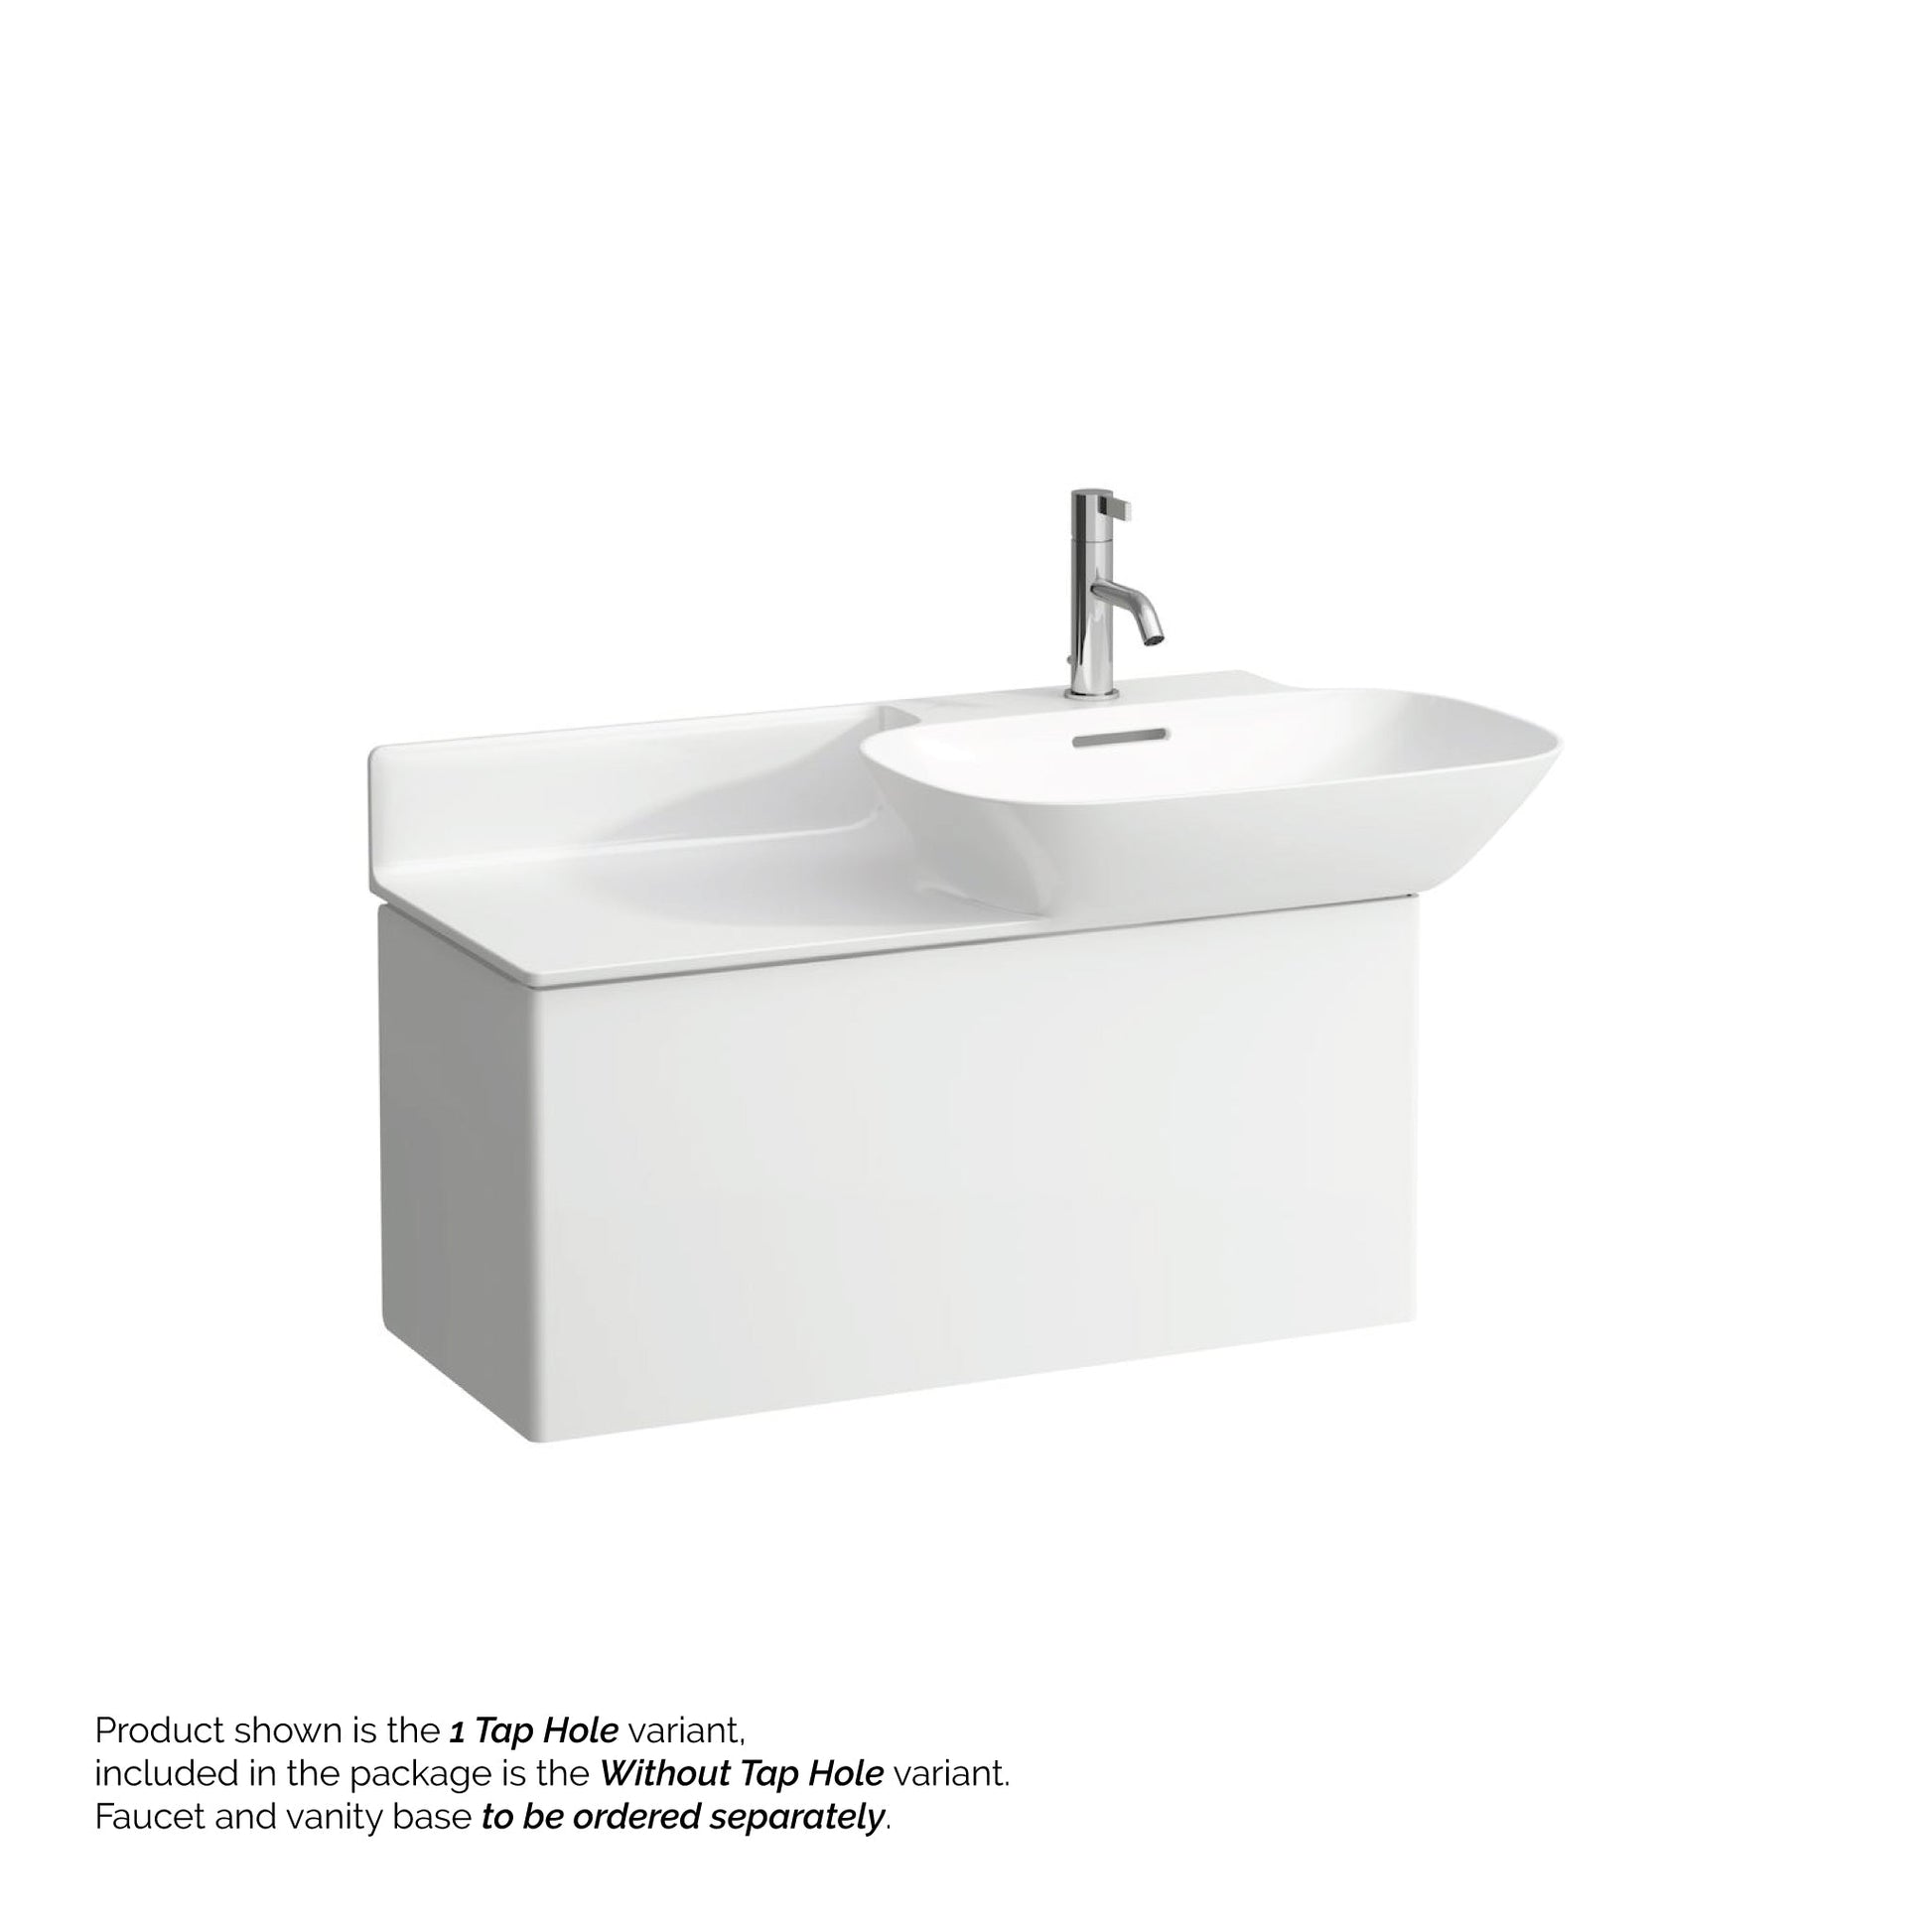 Laufen Ino 35" x 18" White Wall-Mounted Shelf-Left Bathroom Sink Without Faucet Hole